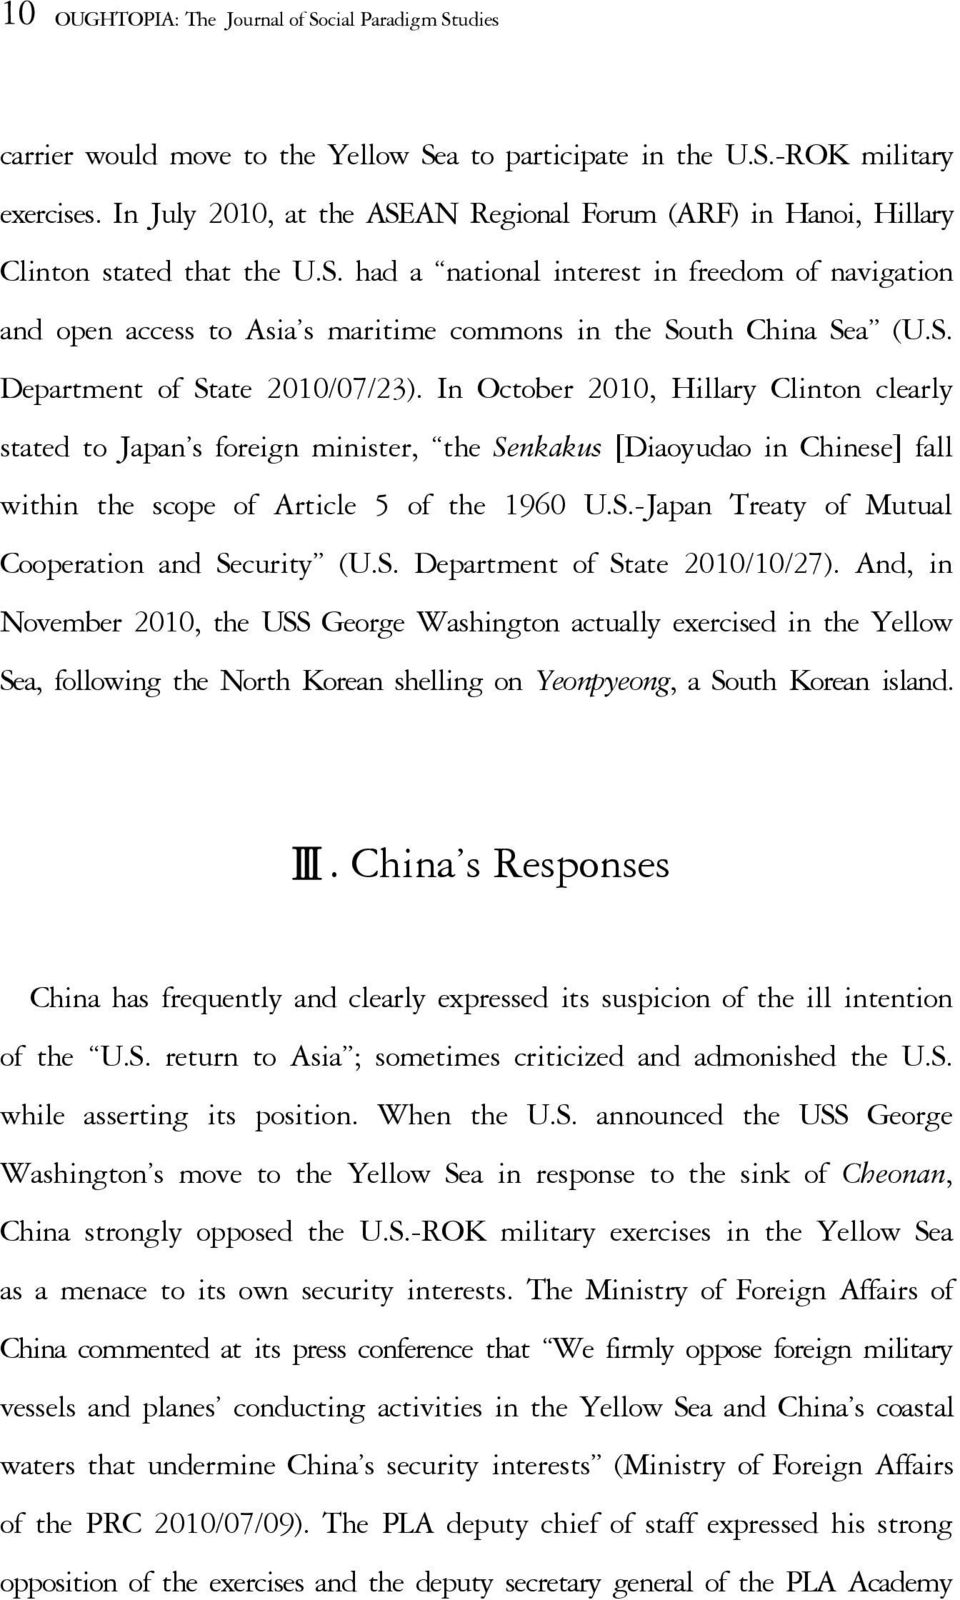 S. Department of State 2010/07/23). In October 2010, Hillary Clinton clearly stated to Japan s foreign minister, the Senkakus [Diaoyudao in Chinese] fall within the scope of Article 5 of the 1960 U.S.-Japan Treaty of Mutual Cooperation and Security (U.